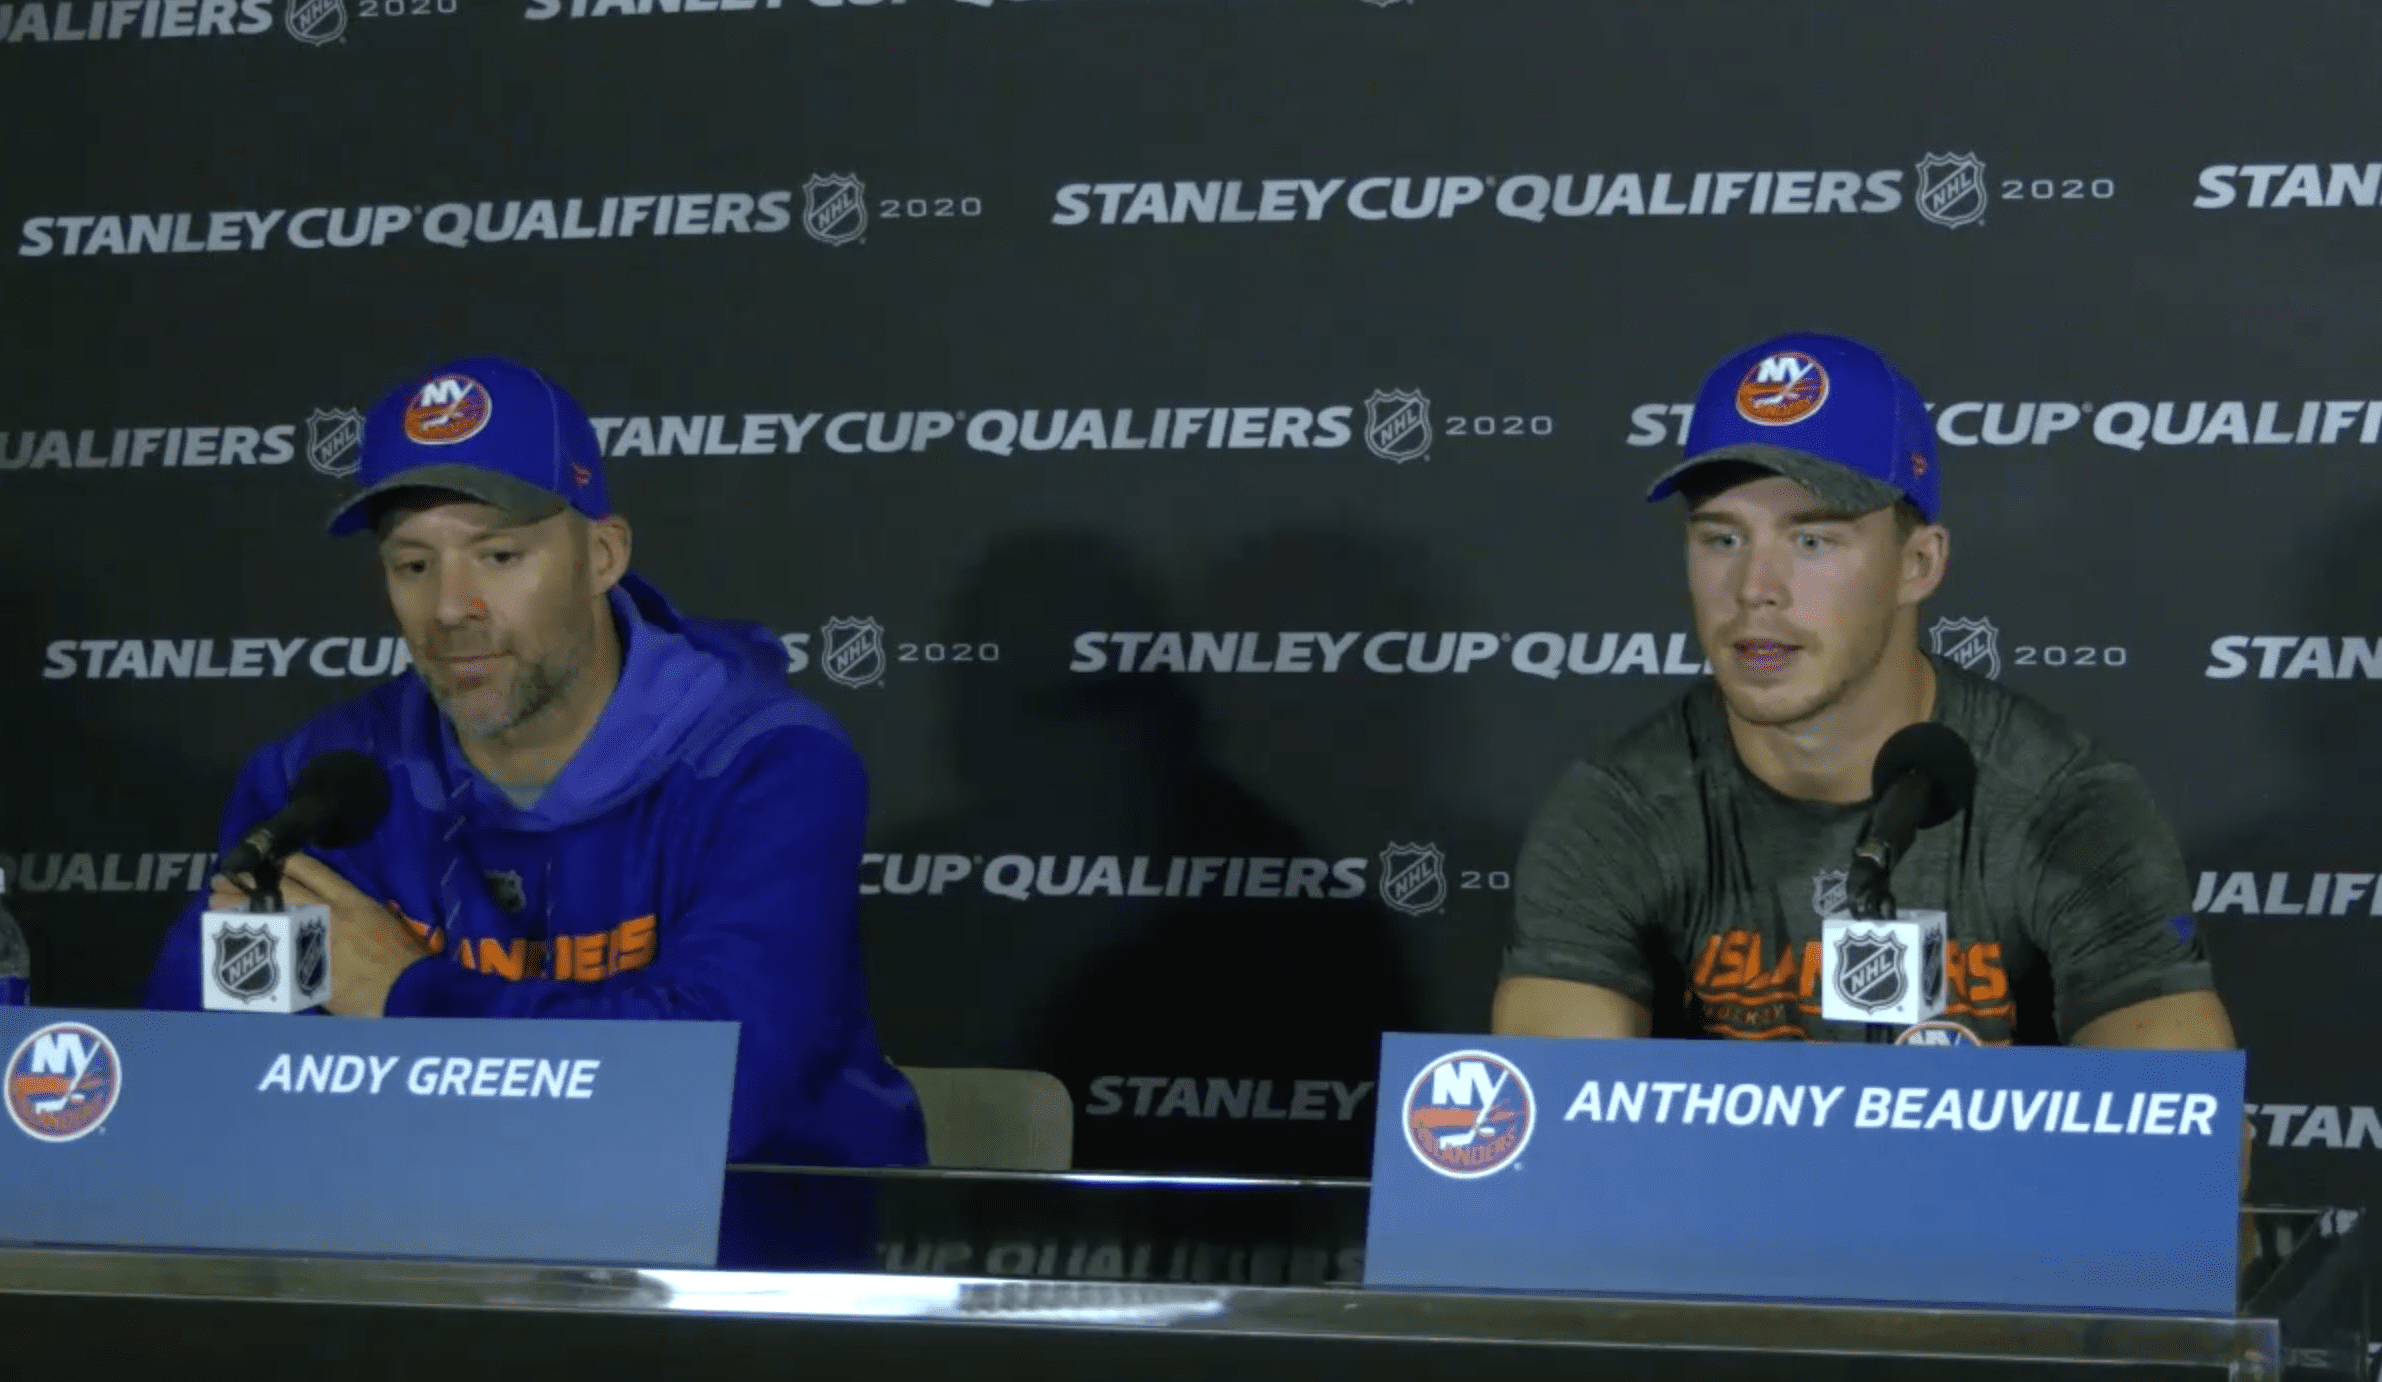 Andy Greene and Anthony Beauvillier